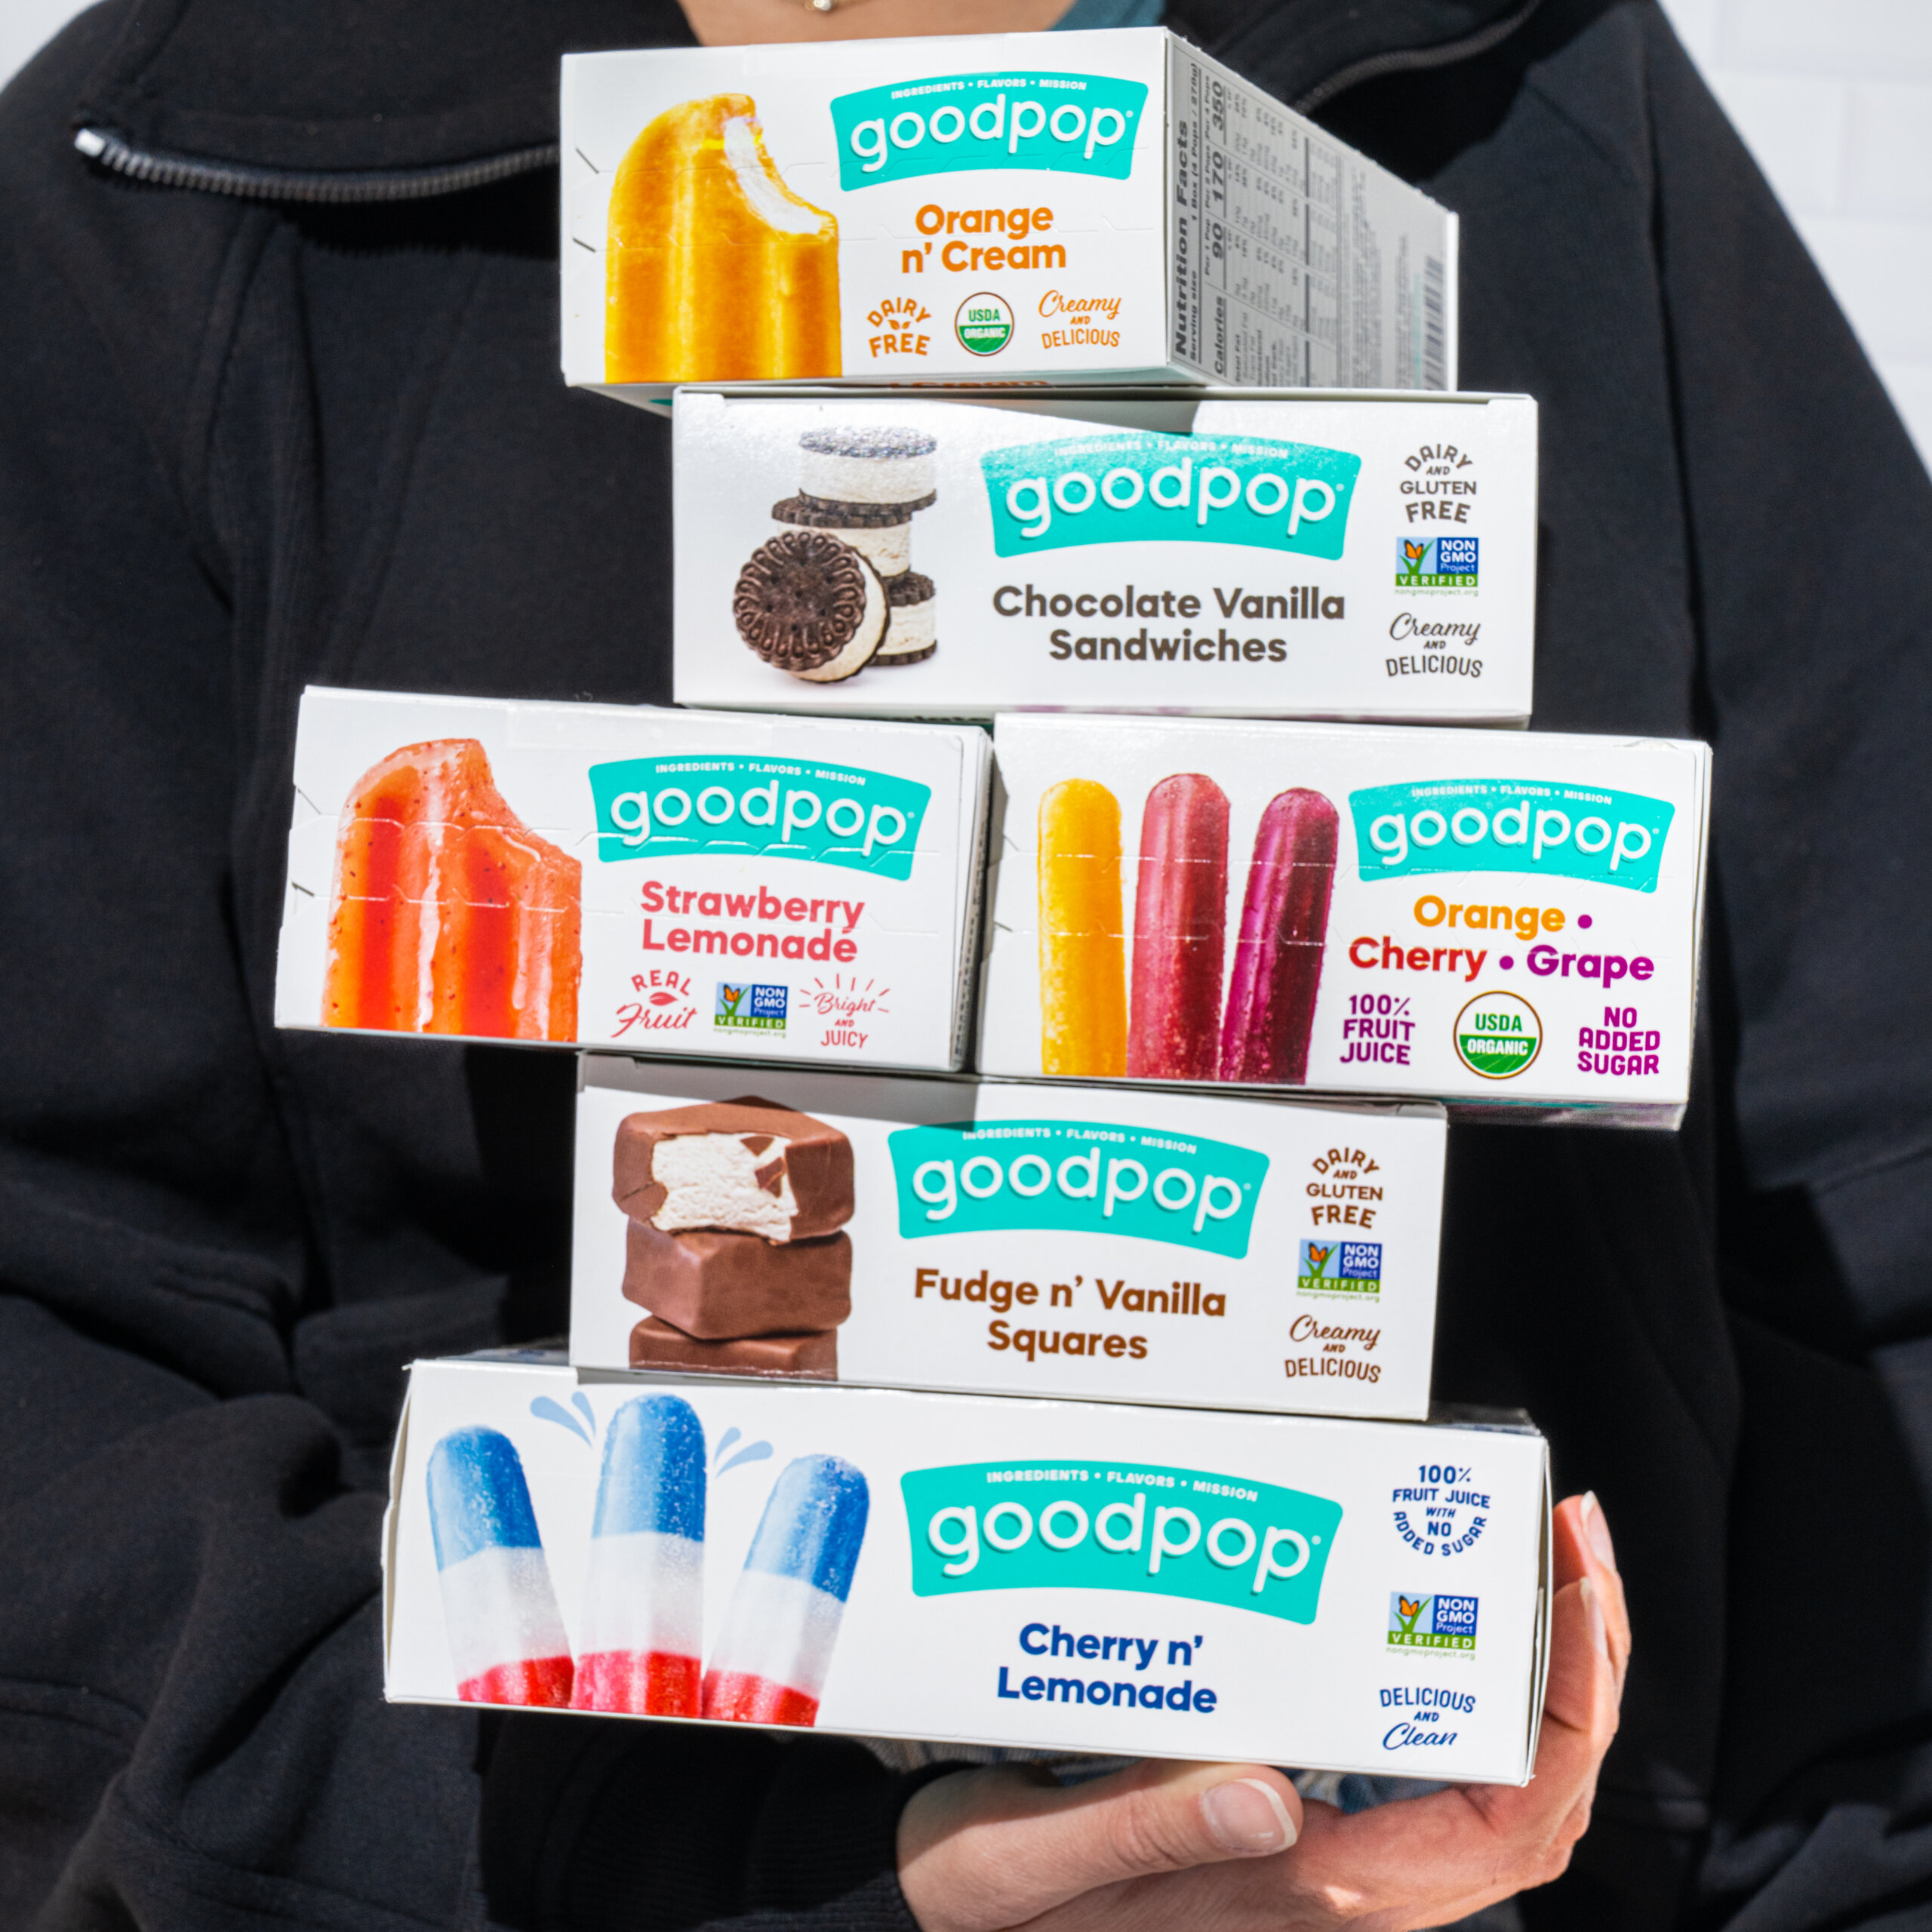 Person holding boxes of goodpop